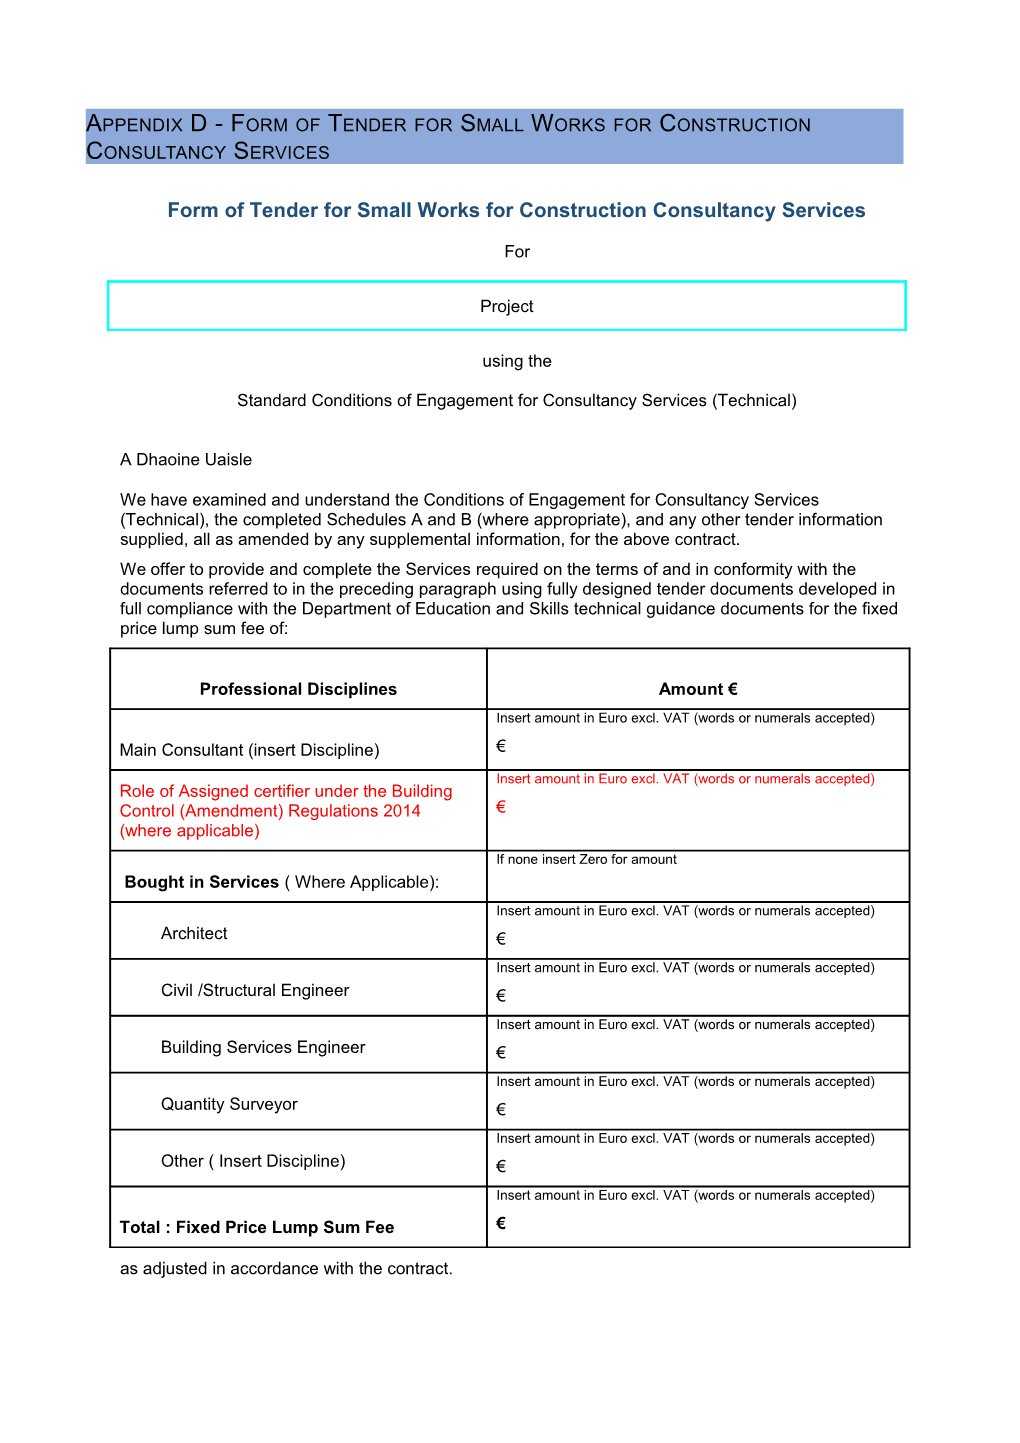 Appendix D - Form of Tender for Small Works for Construction Consultancy Services